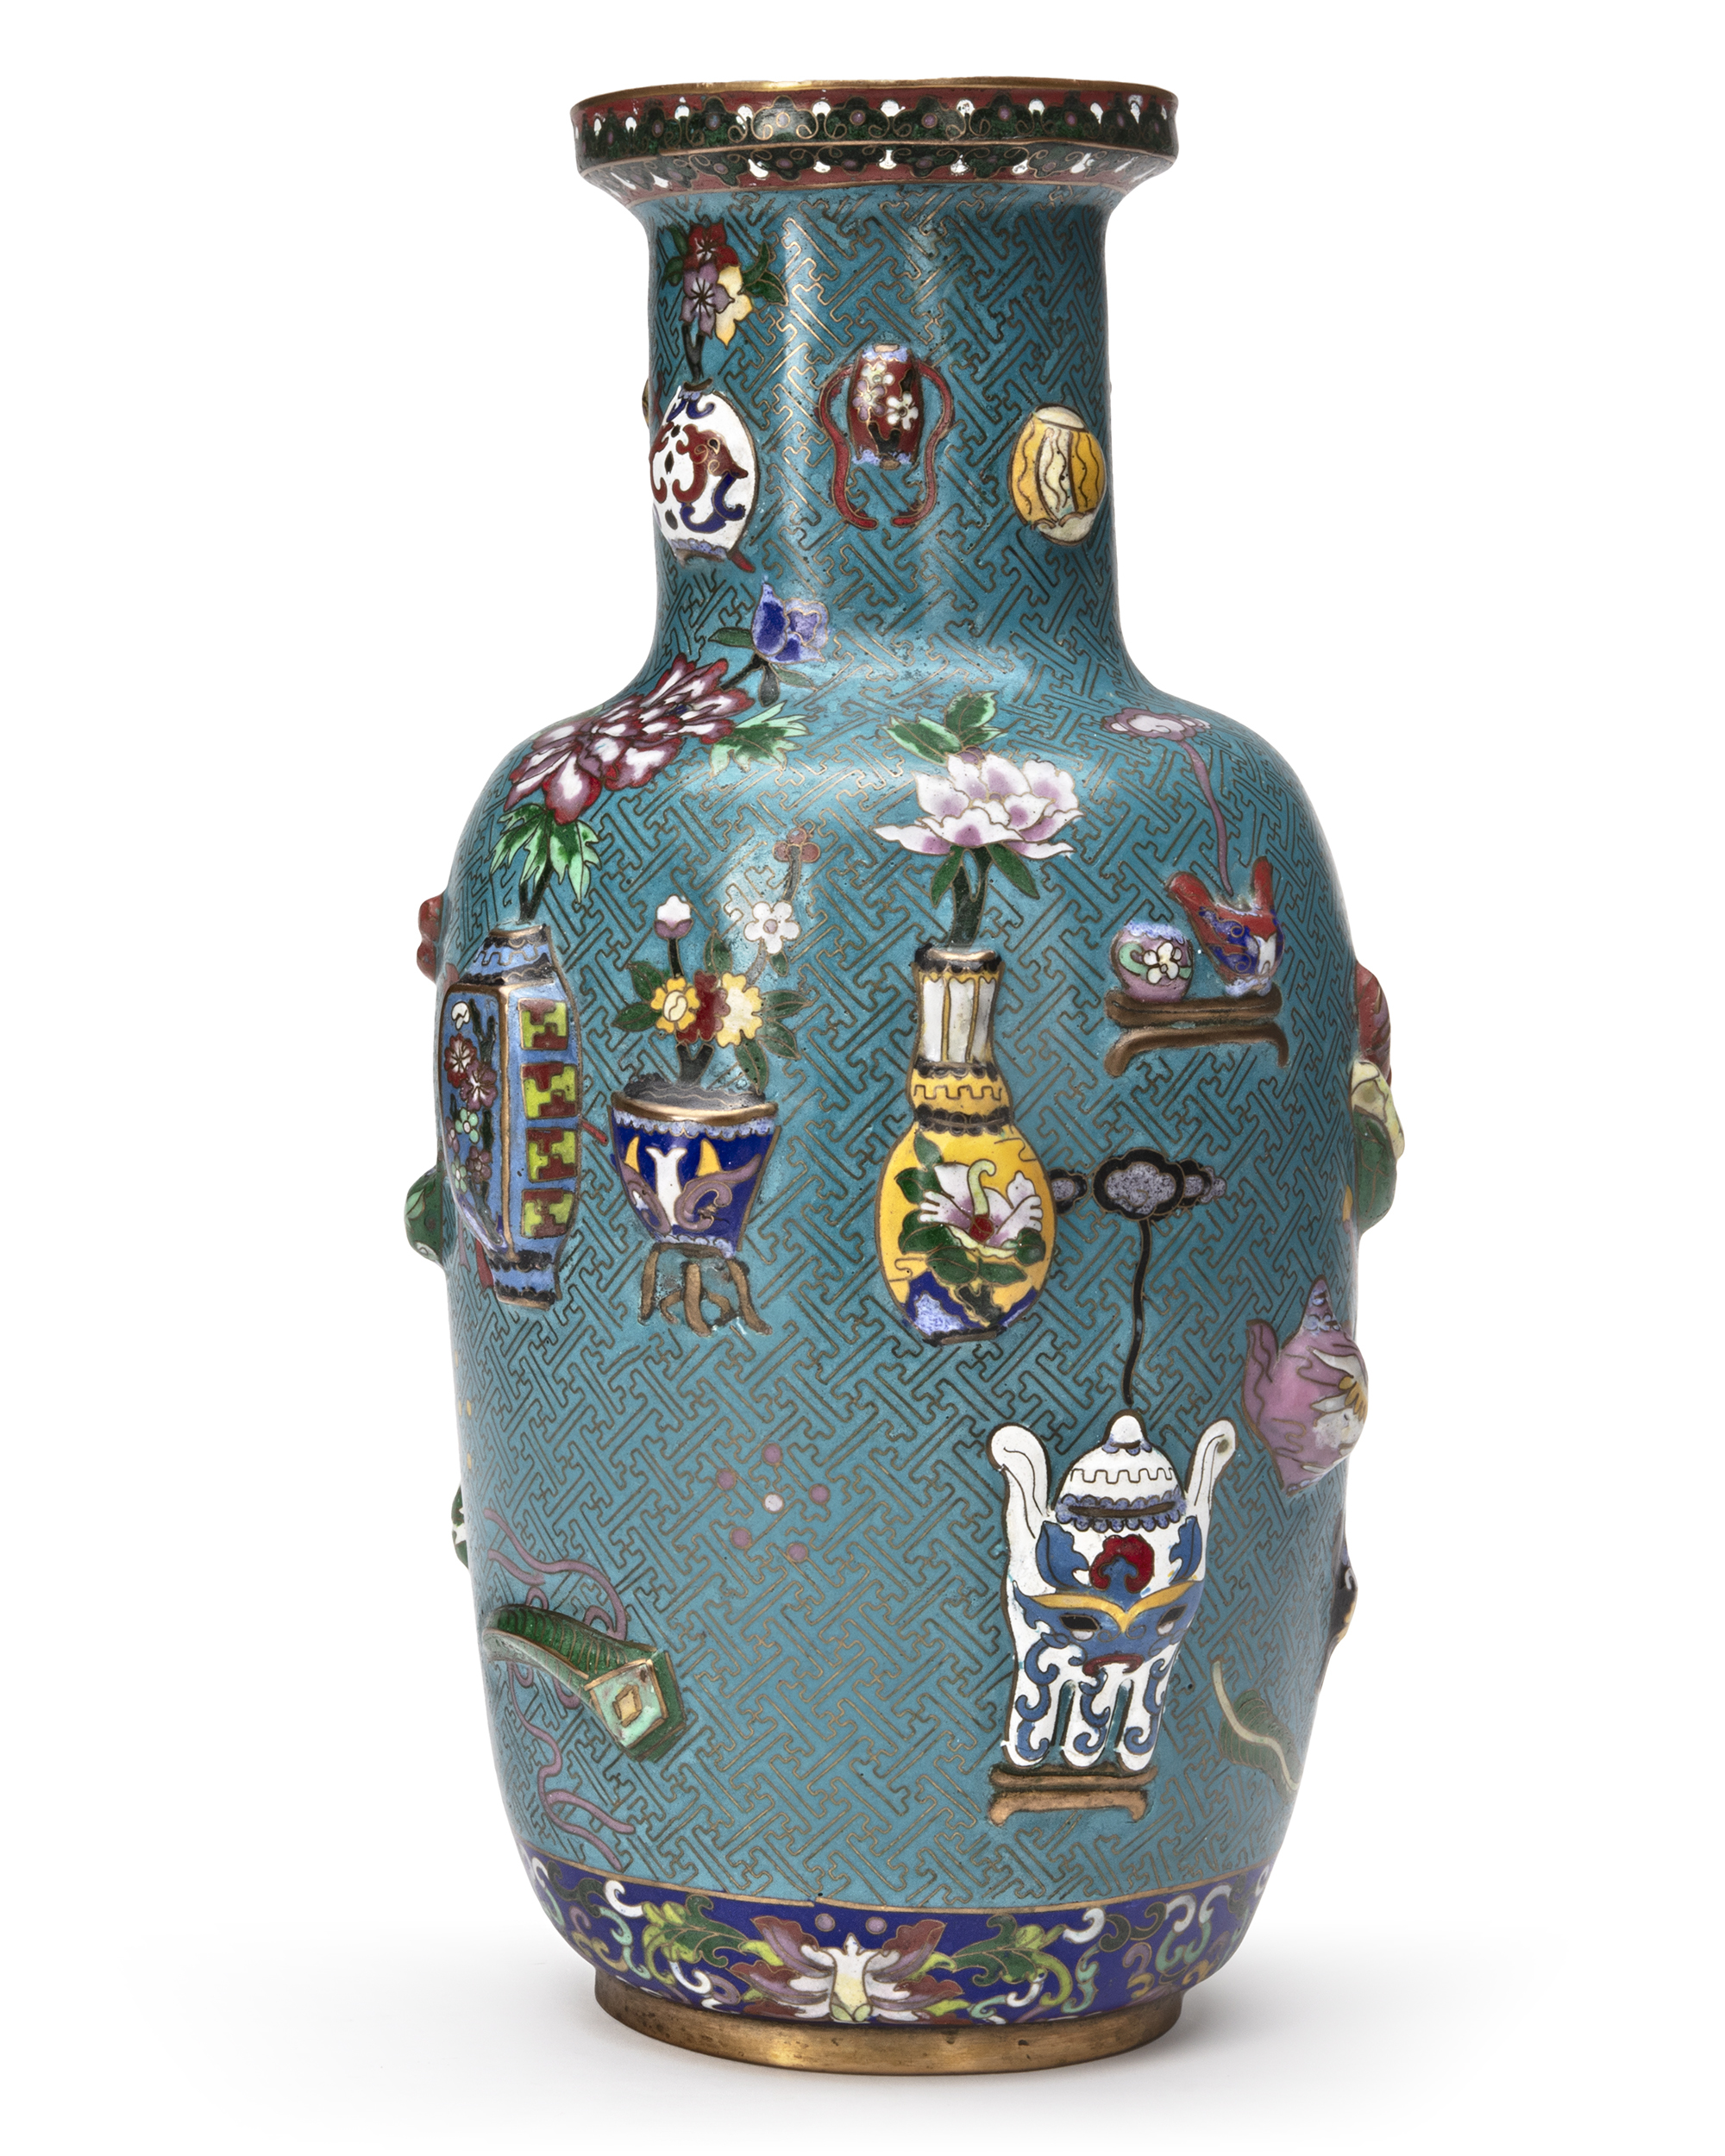 A CHINESE CLOISONNE ENAMEL VASE, 19TH/20TH CENTURY - Image 3 of 5